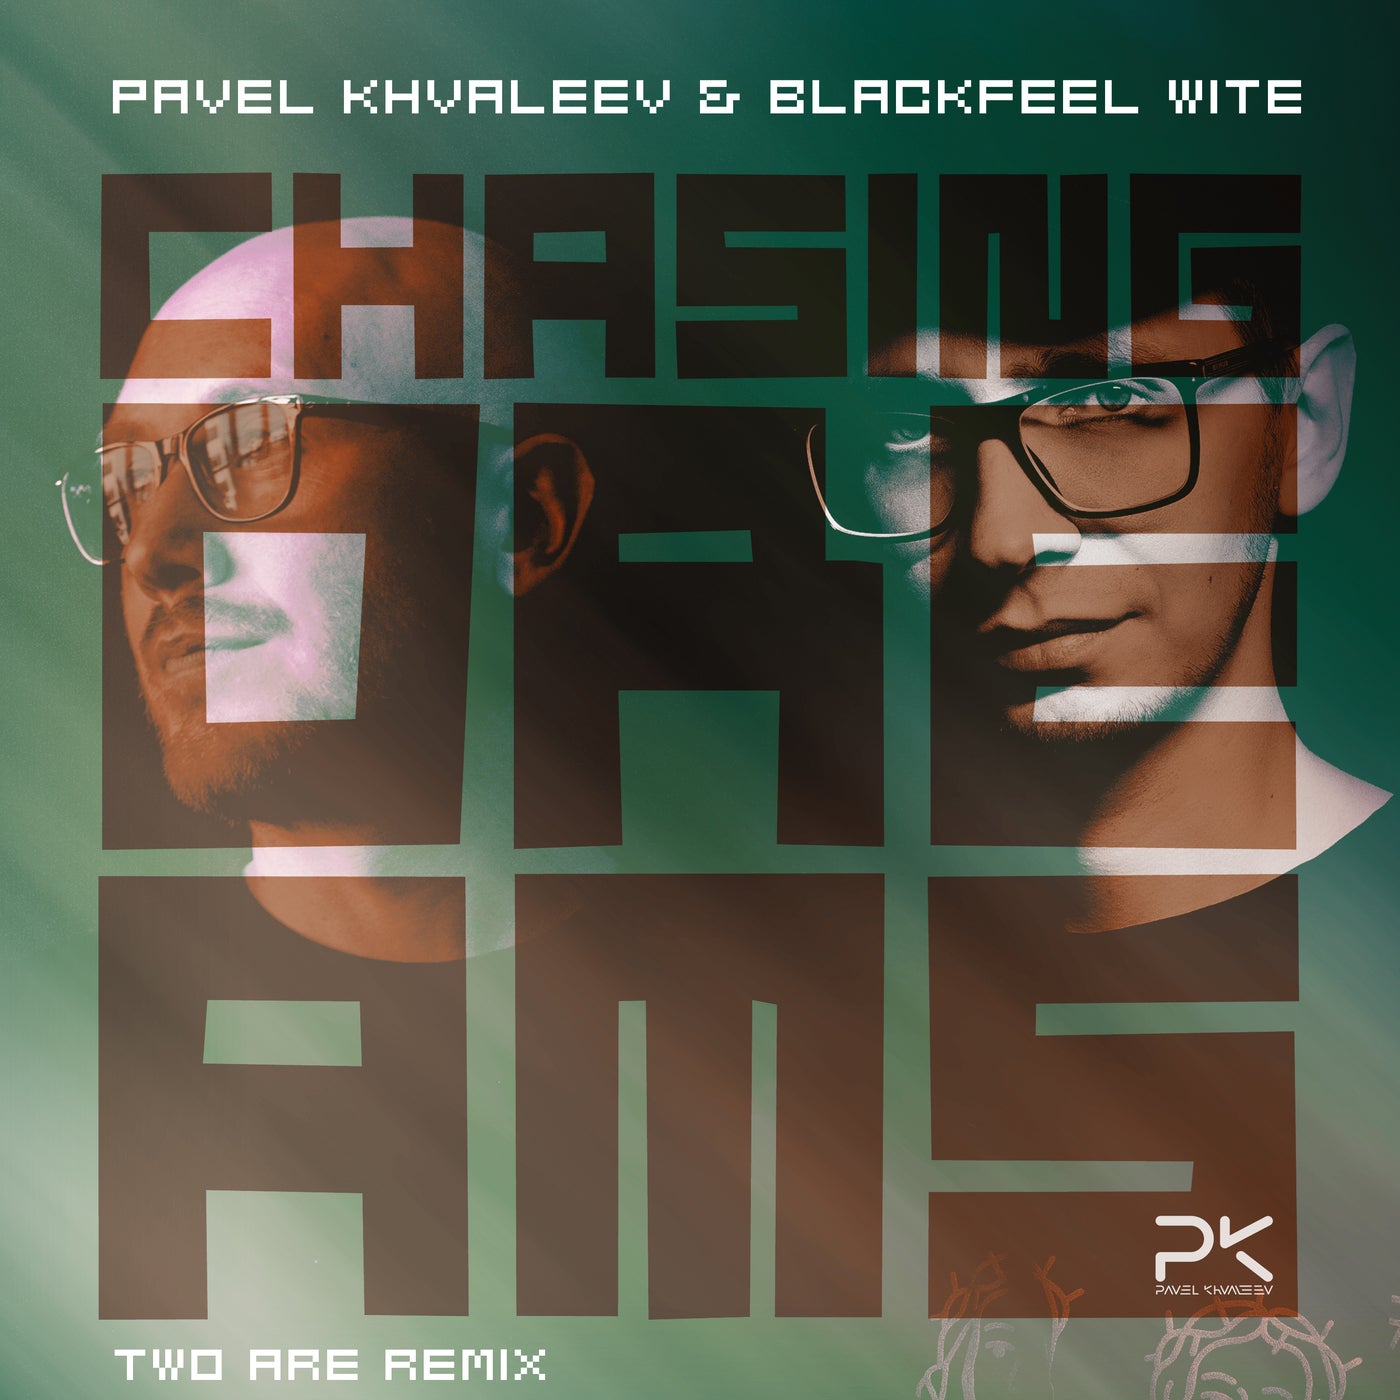 Pavel Khvaleev & Blackfeel Wite - Chasing Dreams (Two Are Extended Remix)